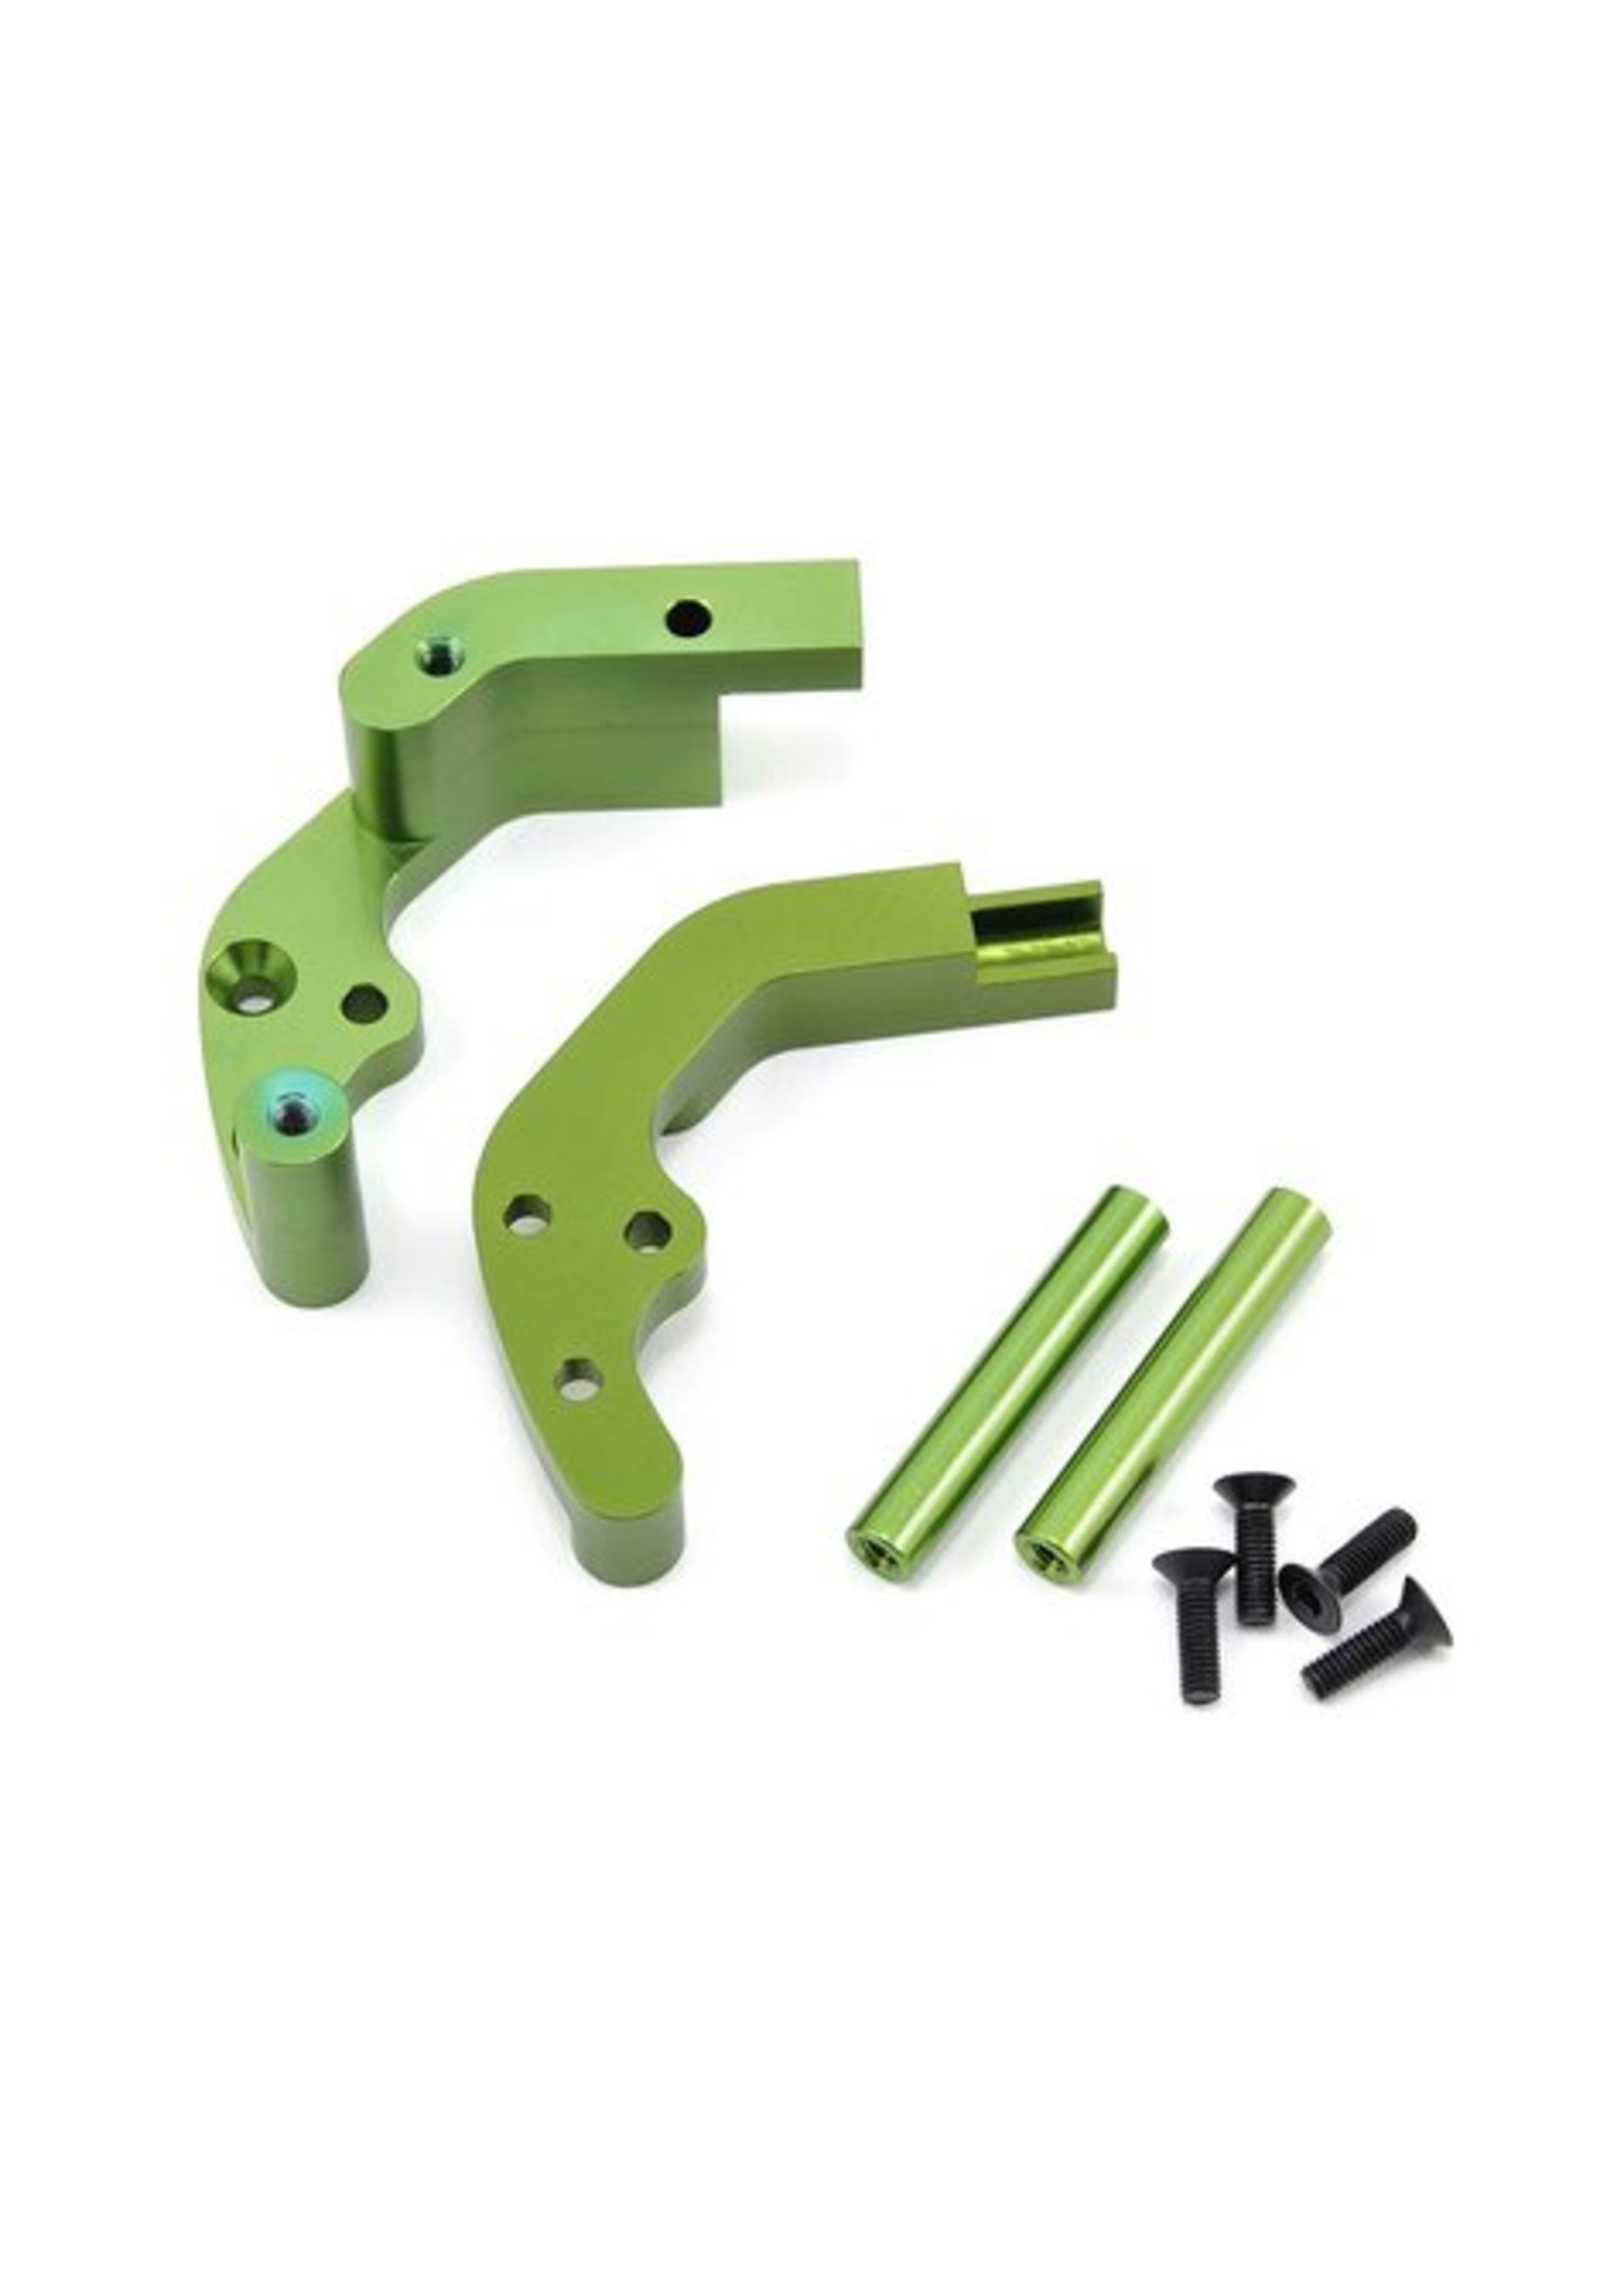 ST Racing Concepts SPTST3677G ST Racing Concepts CNC Machined Aluminum Rear Motor Guard for Traxxas cars/trucks (Green)